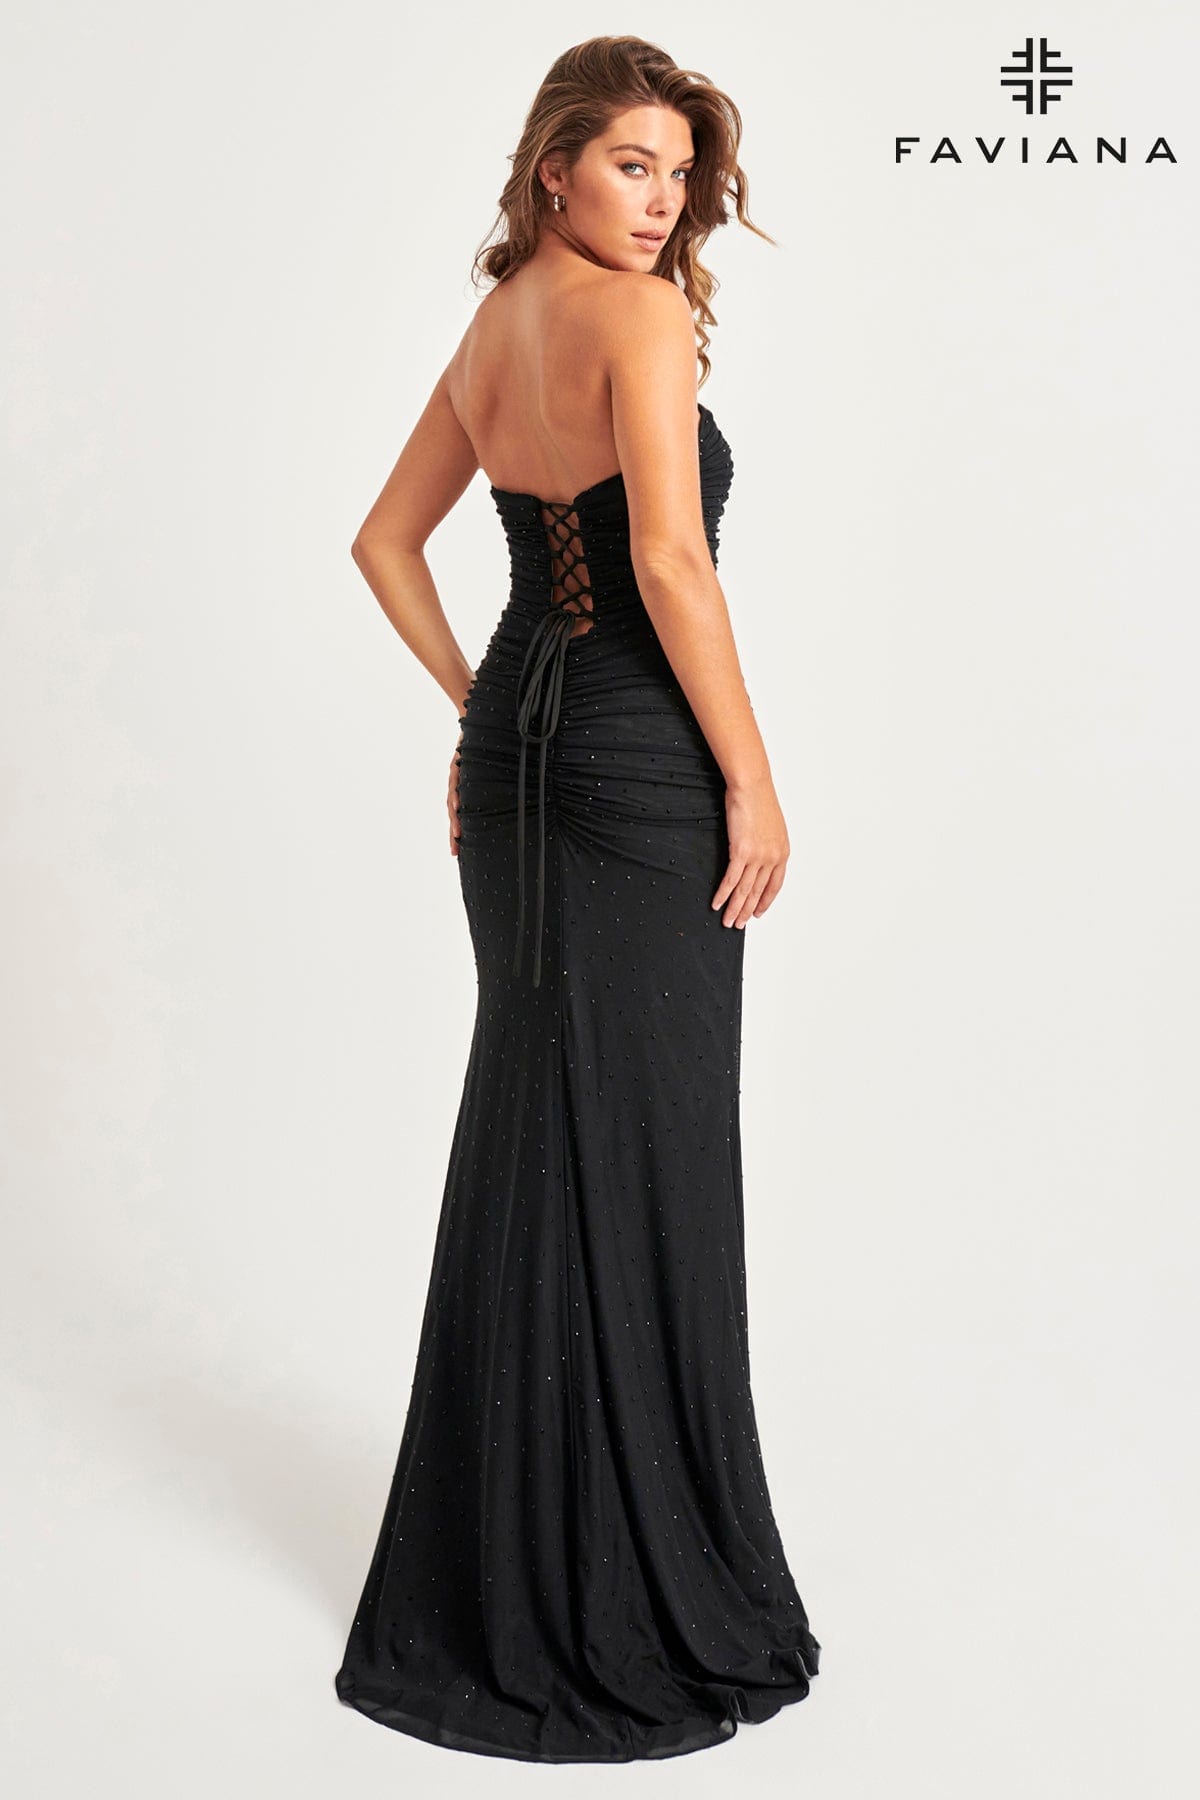 Black Strapless Mesh Dress With Exposed Corset Boning And Sparkly Crystals | 11040